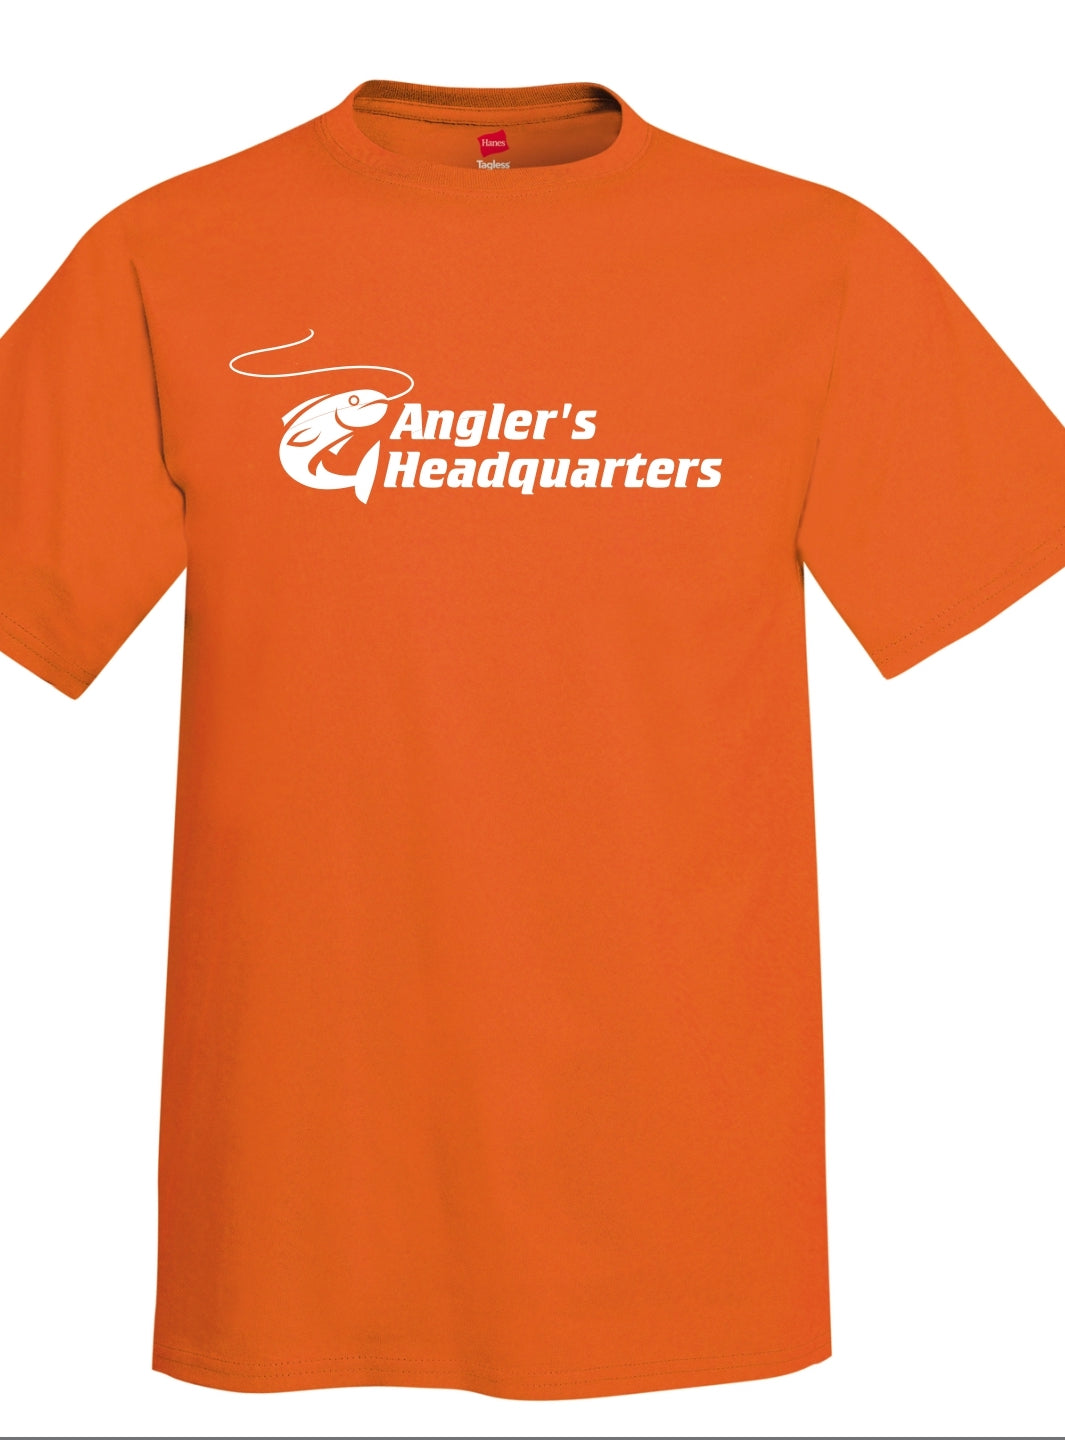 Angler's Headquarters Shirts (Youth Sizes)